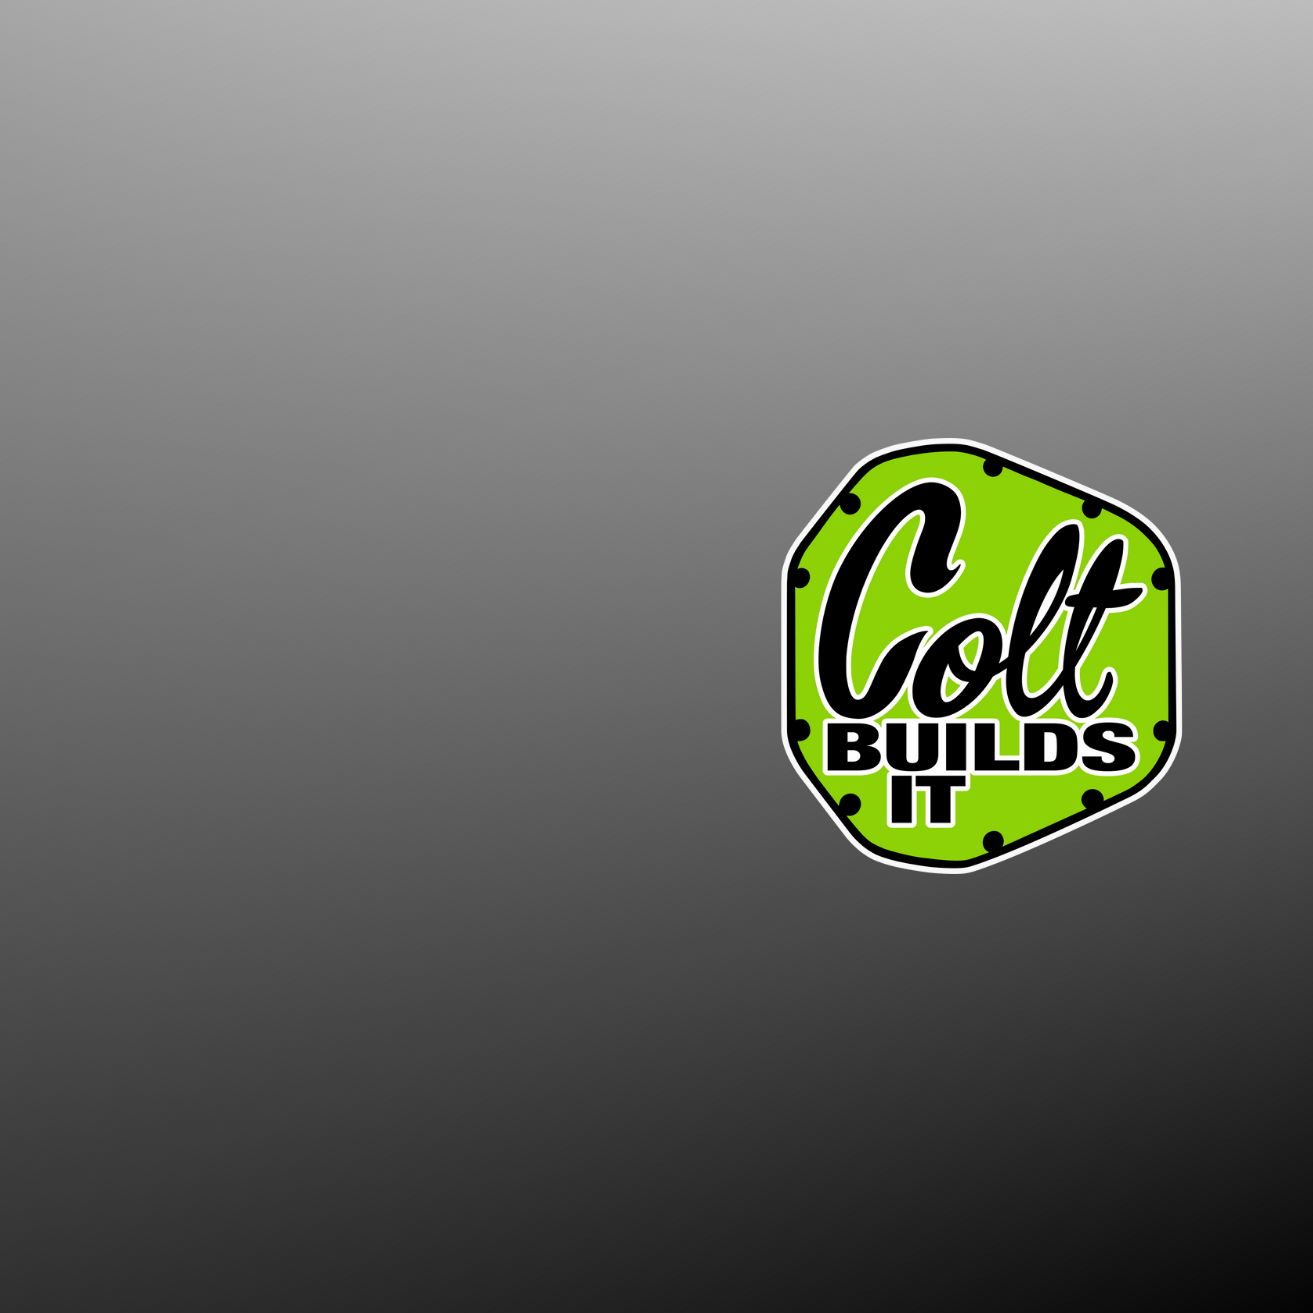 Colt Builds It-Goats Trail Offroad Apparel Company